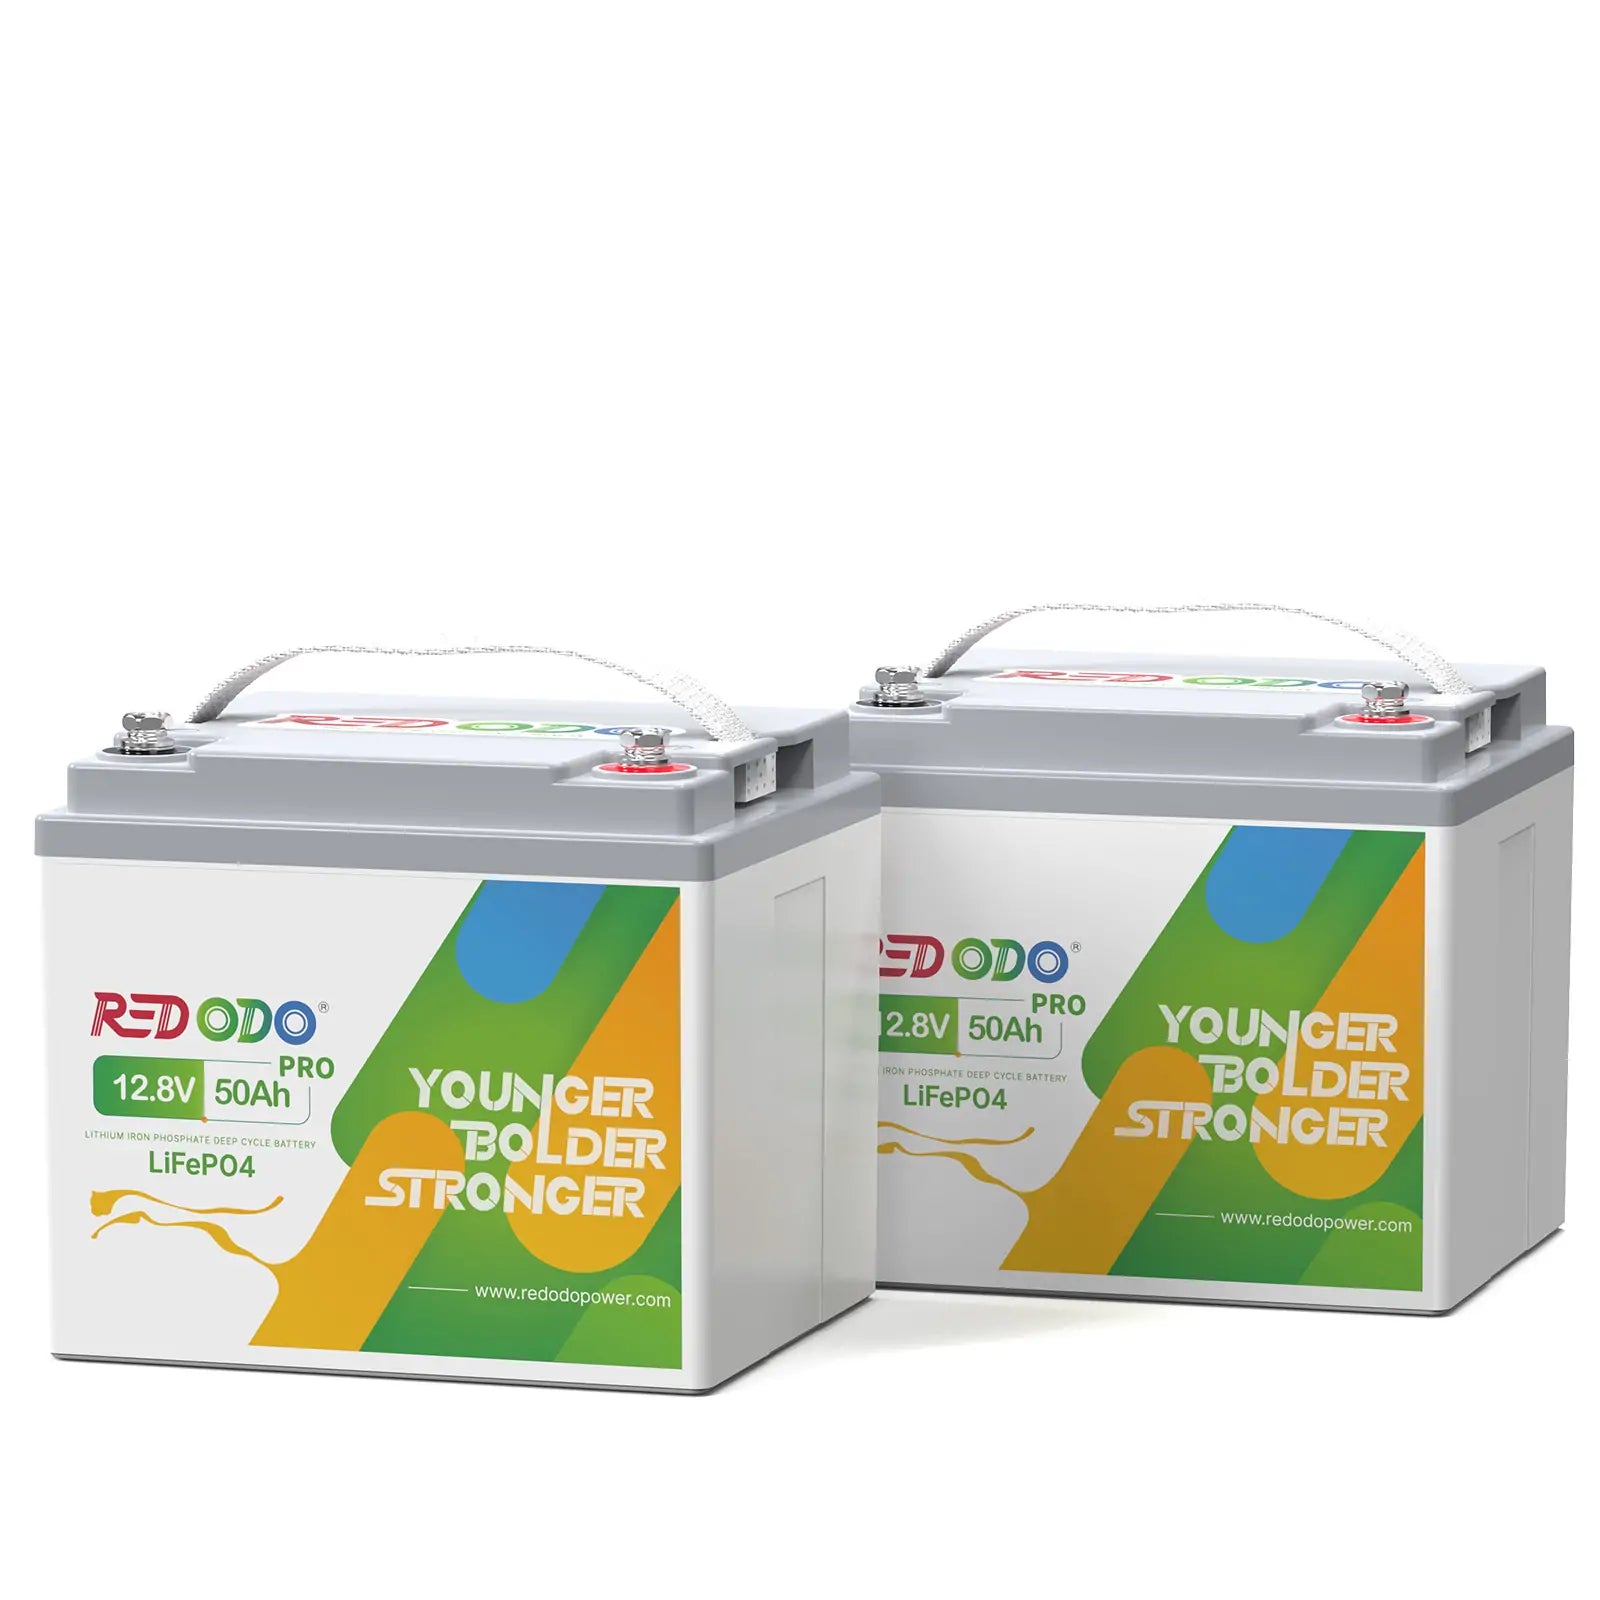 【As low as $166】Redodo 12V 50Ah Pro LiFePO4 Battery | 640Wh & 640W